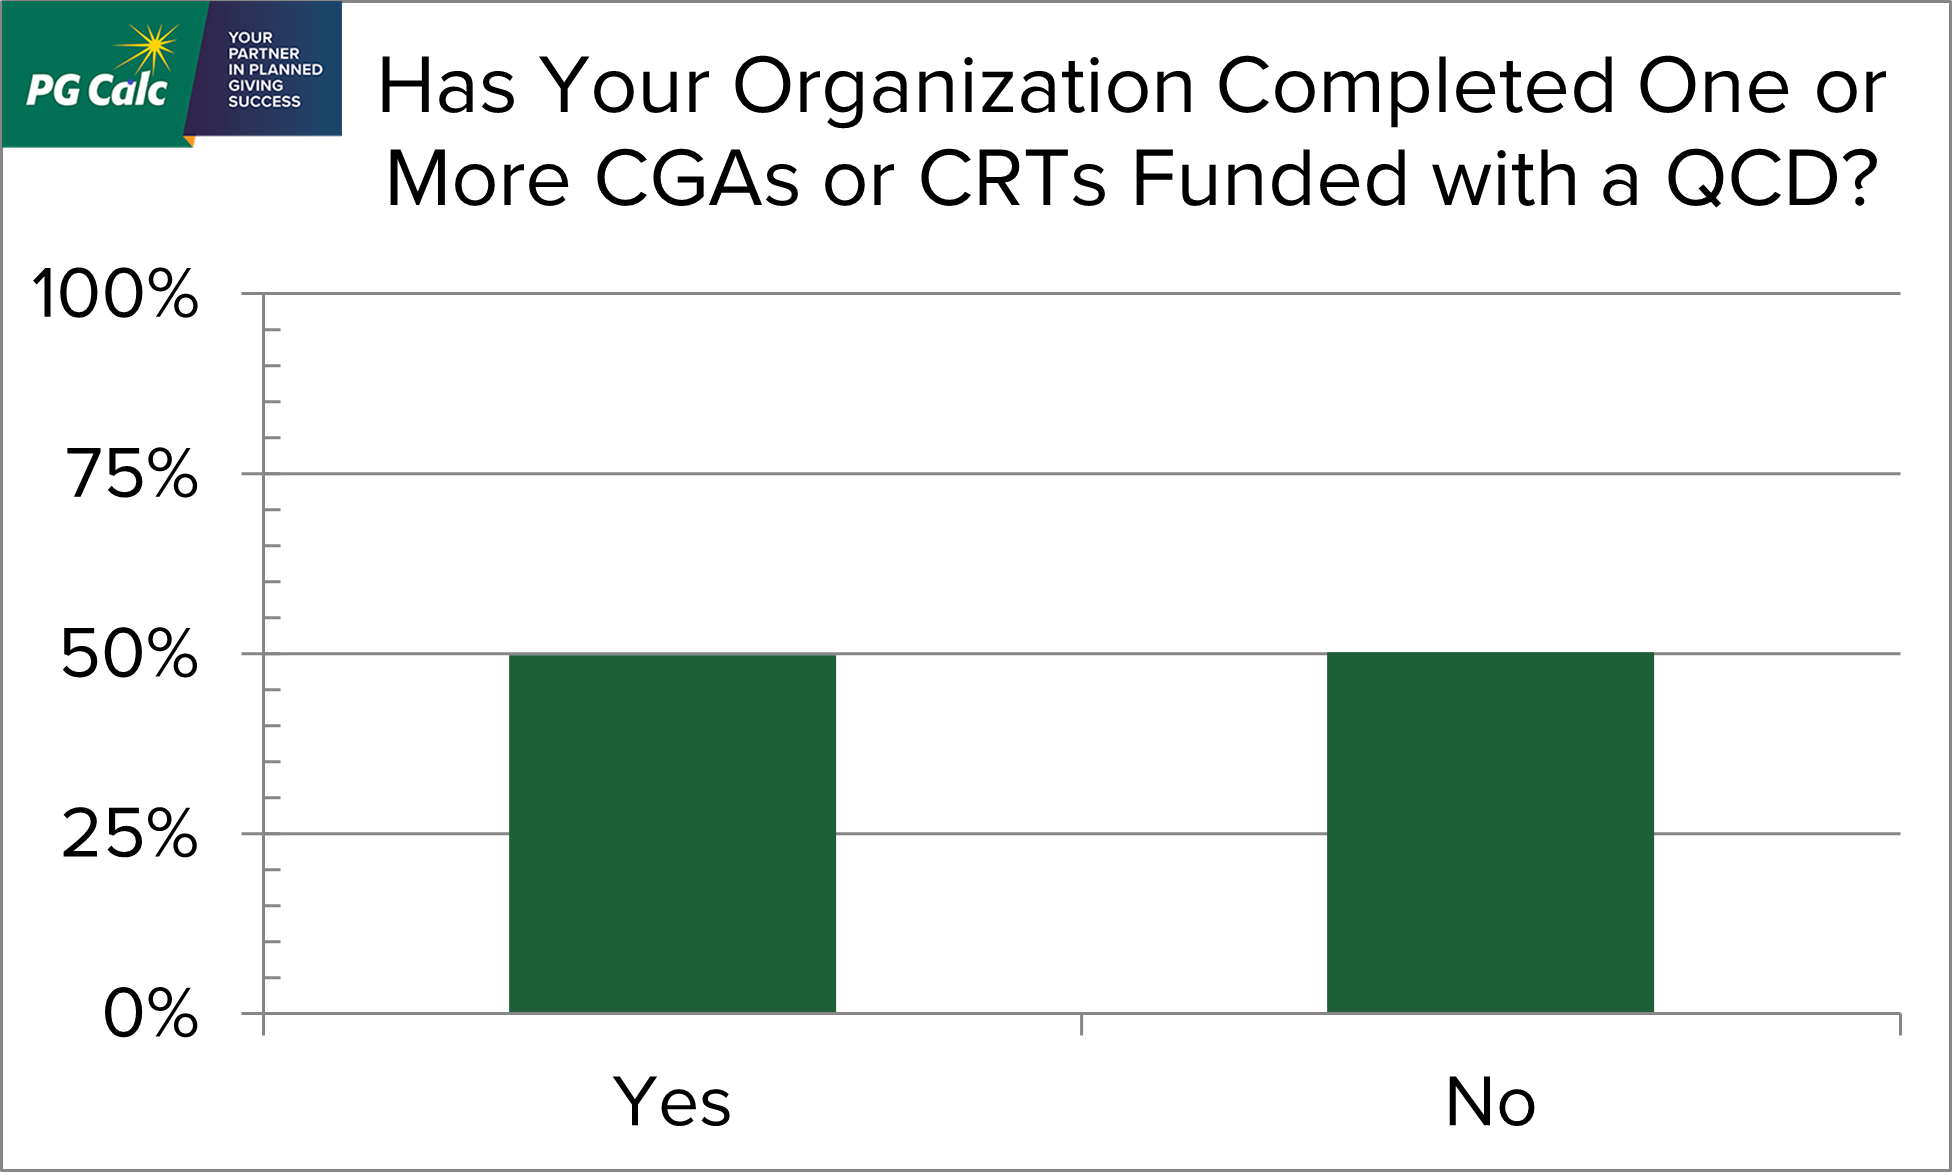 Graph: Has your organization completed one or more CGAs or CRTs funded with a QCD? Yes = 49.8%, No = 50.2%